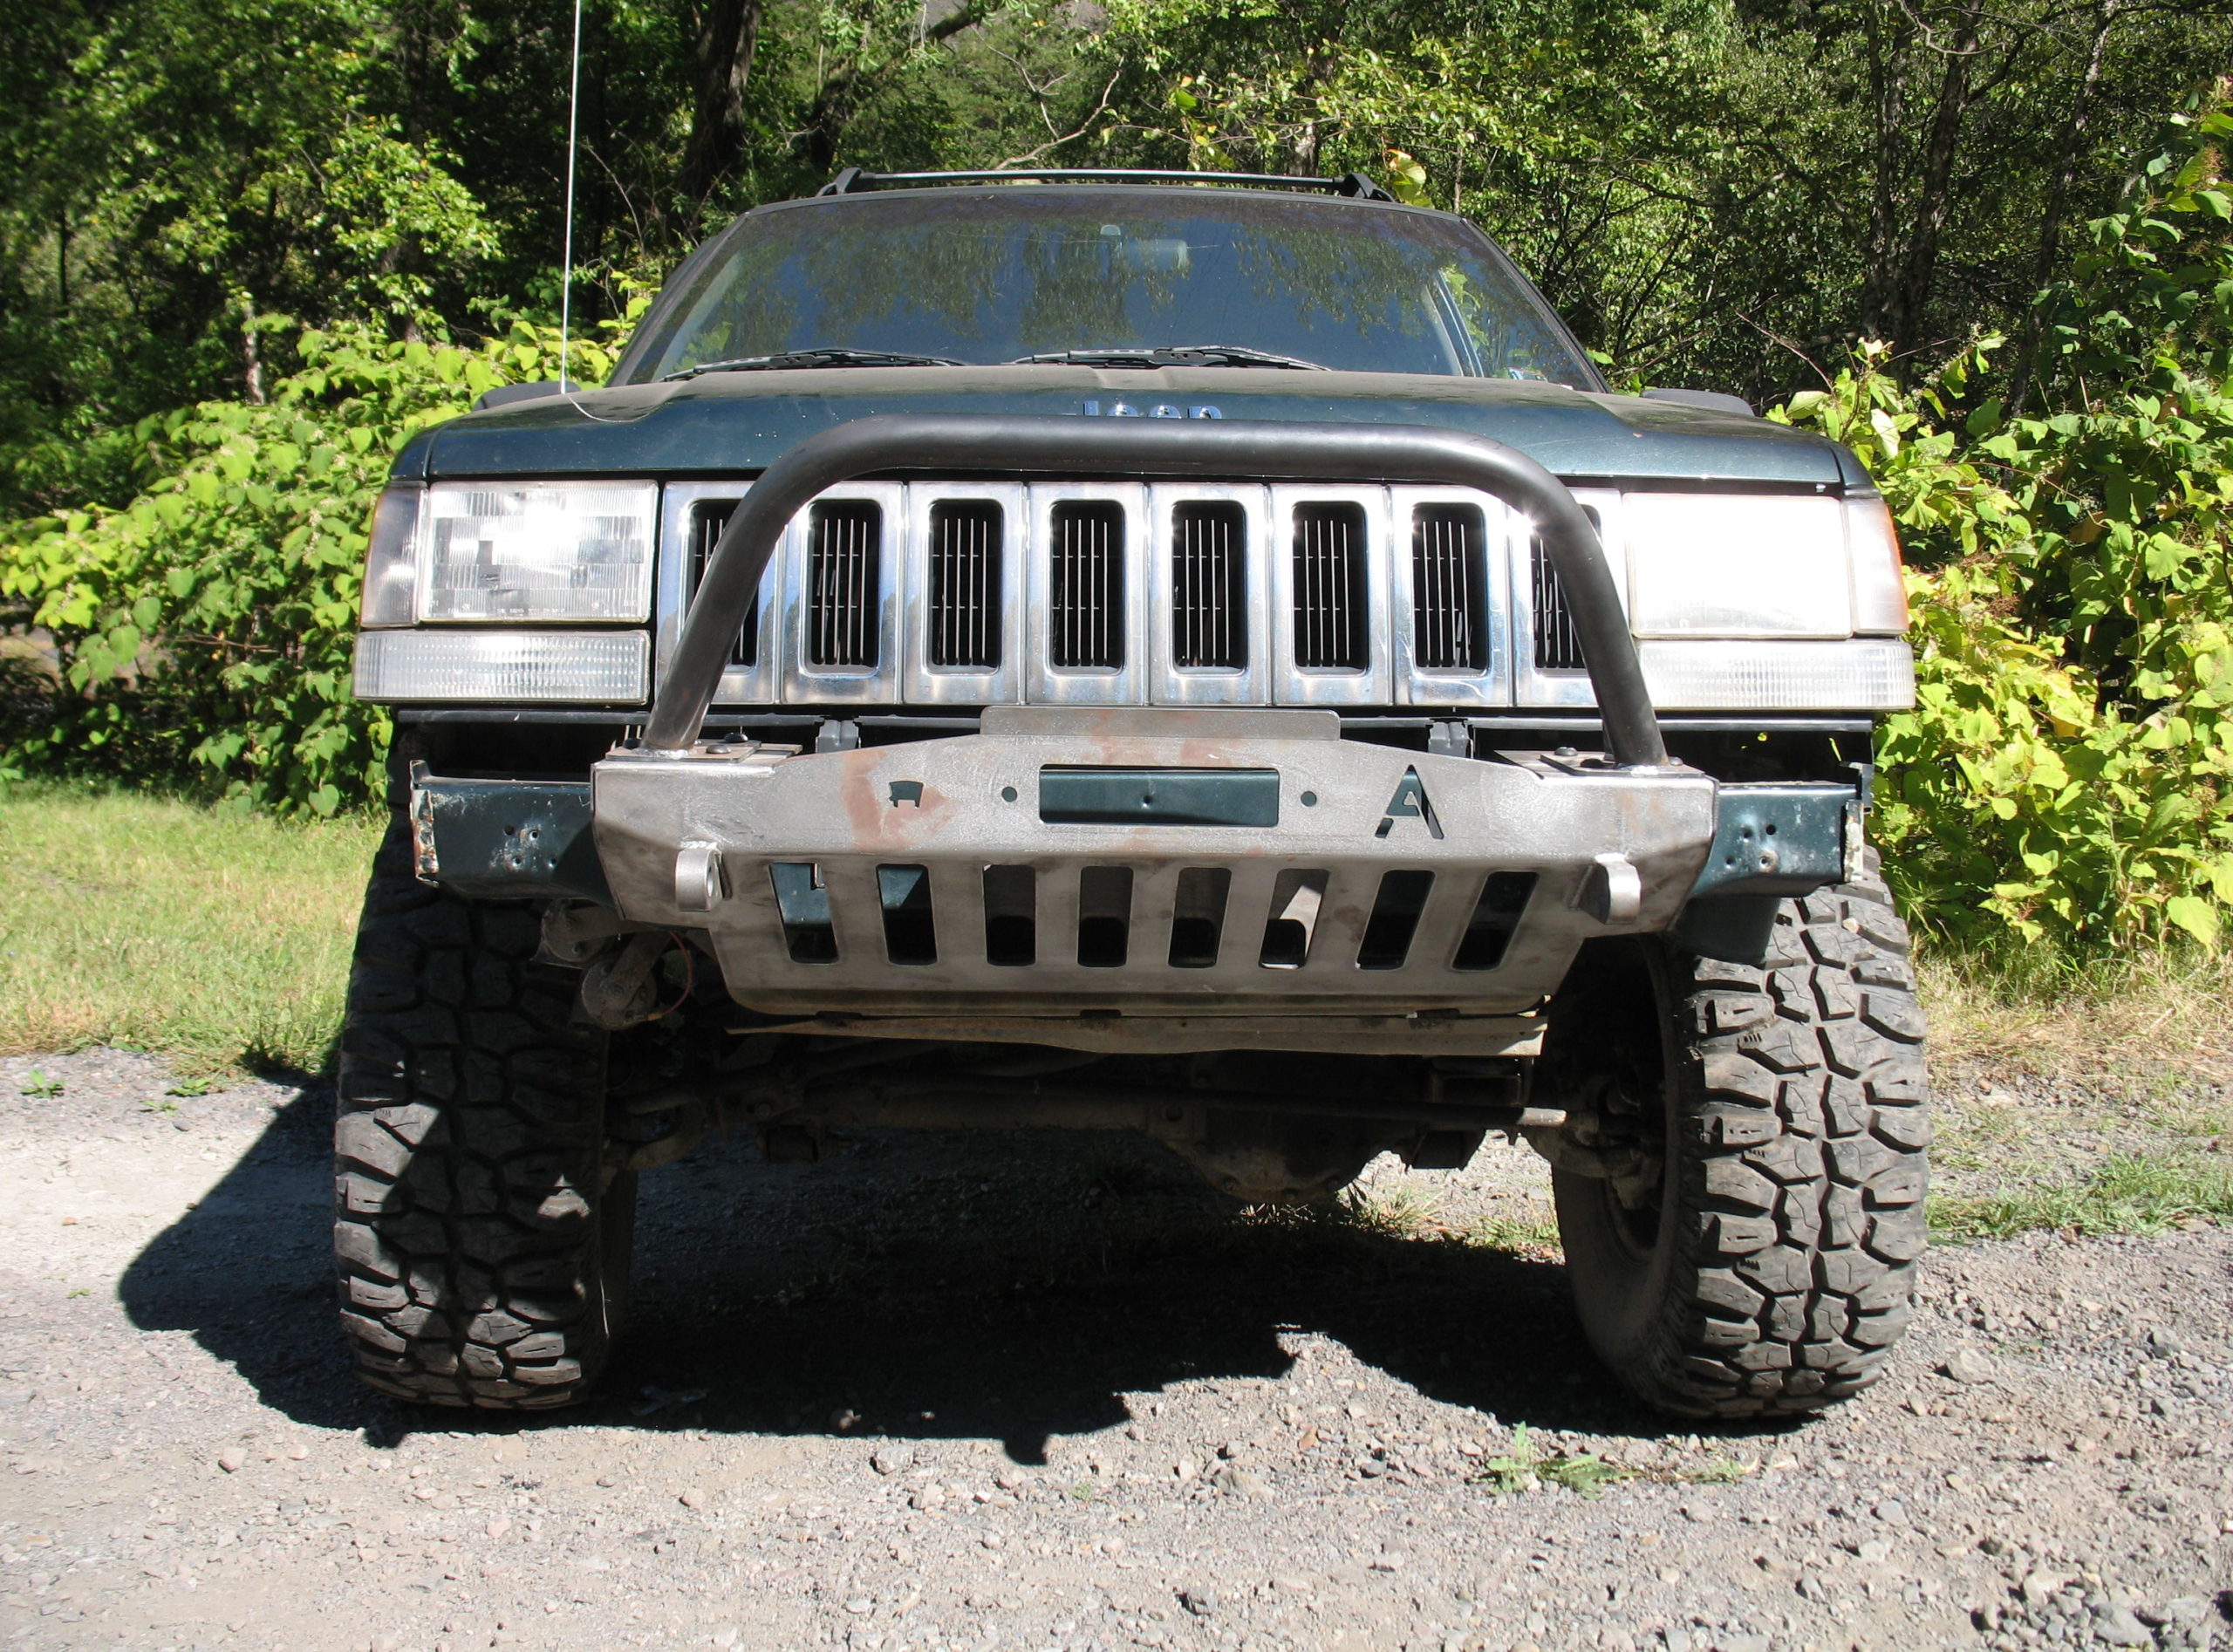 Elite Jeep Grand Cherokee ZJ Modular Shorty Plain Front Winch Bumper ('93-' 98) - Affordable Offroad